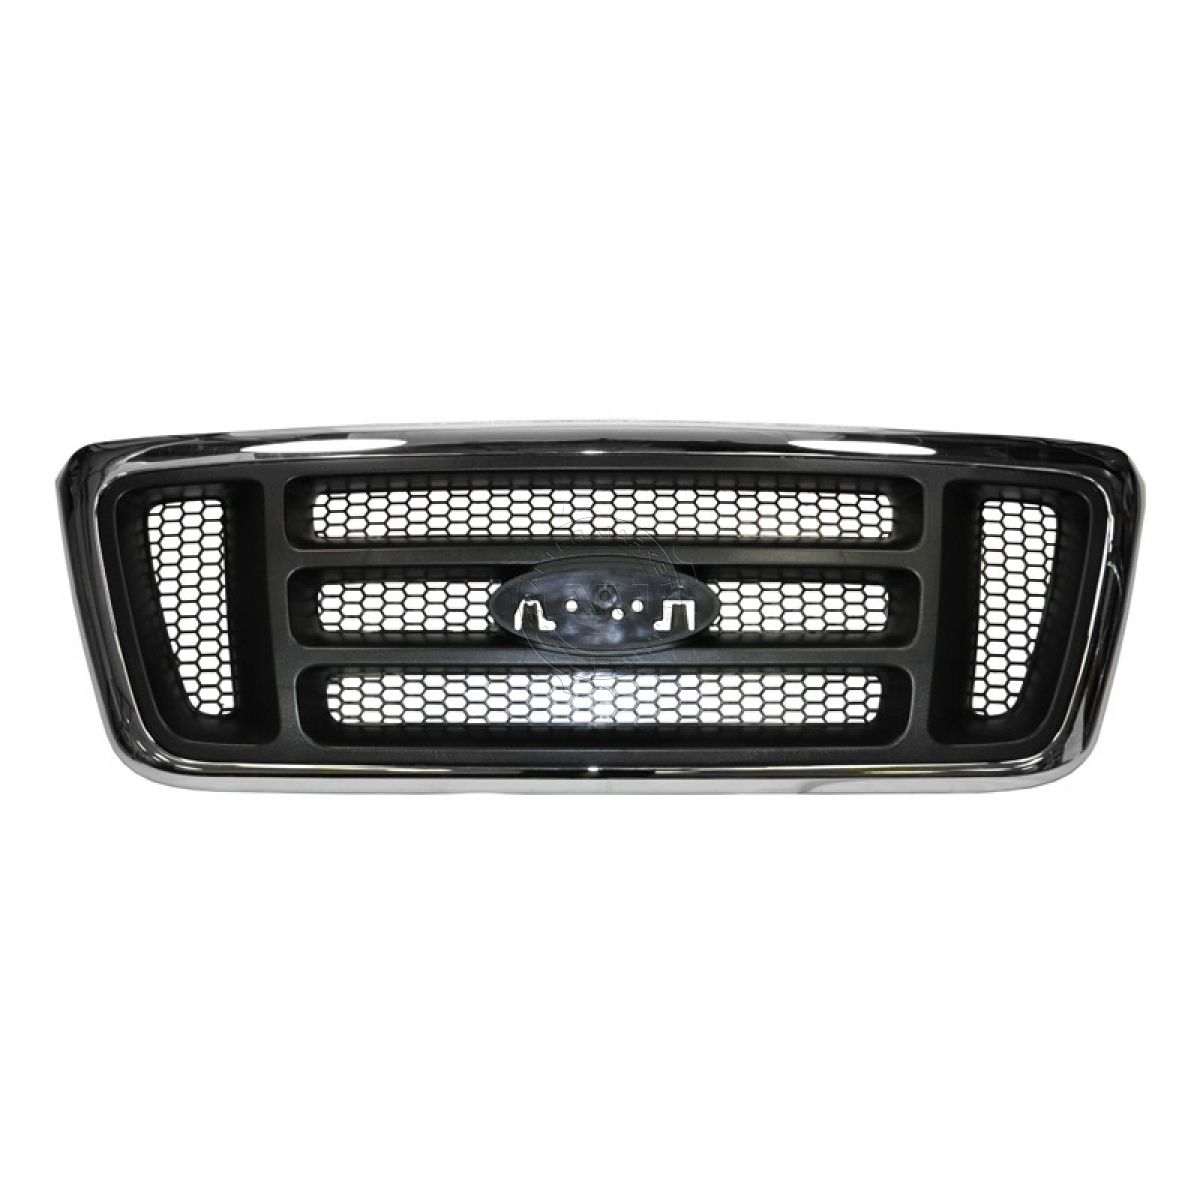 Front End Grille Grill Chrome & Dark Gray for 04-08 Ford F150 Pickup Truck New